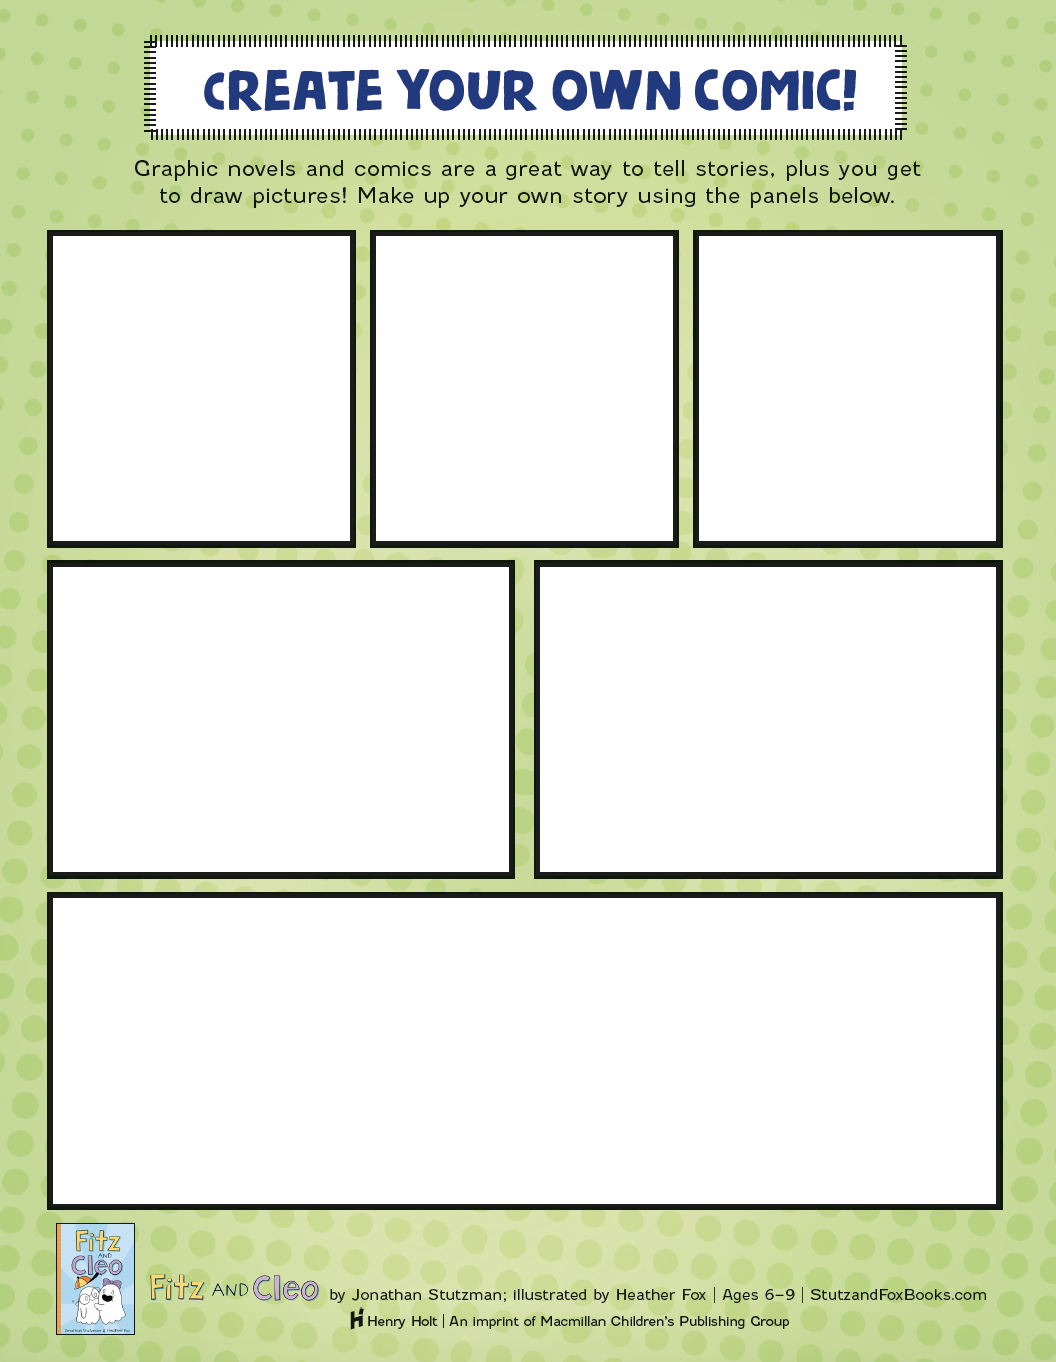 Create Your Own Comic!